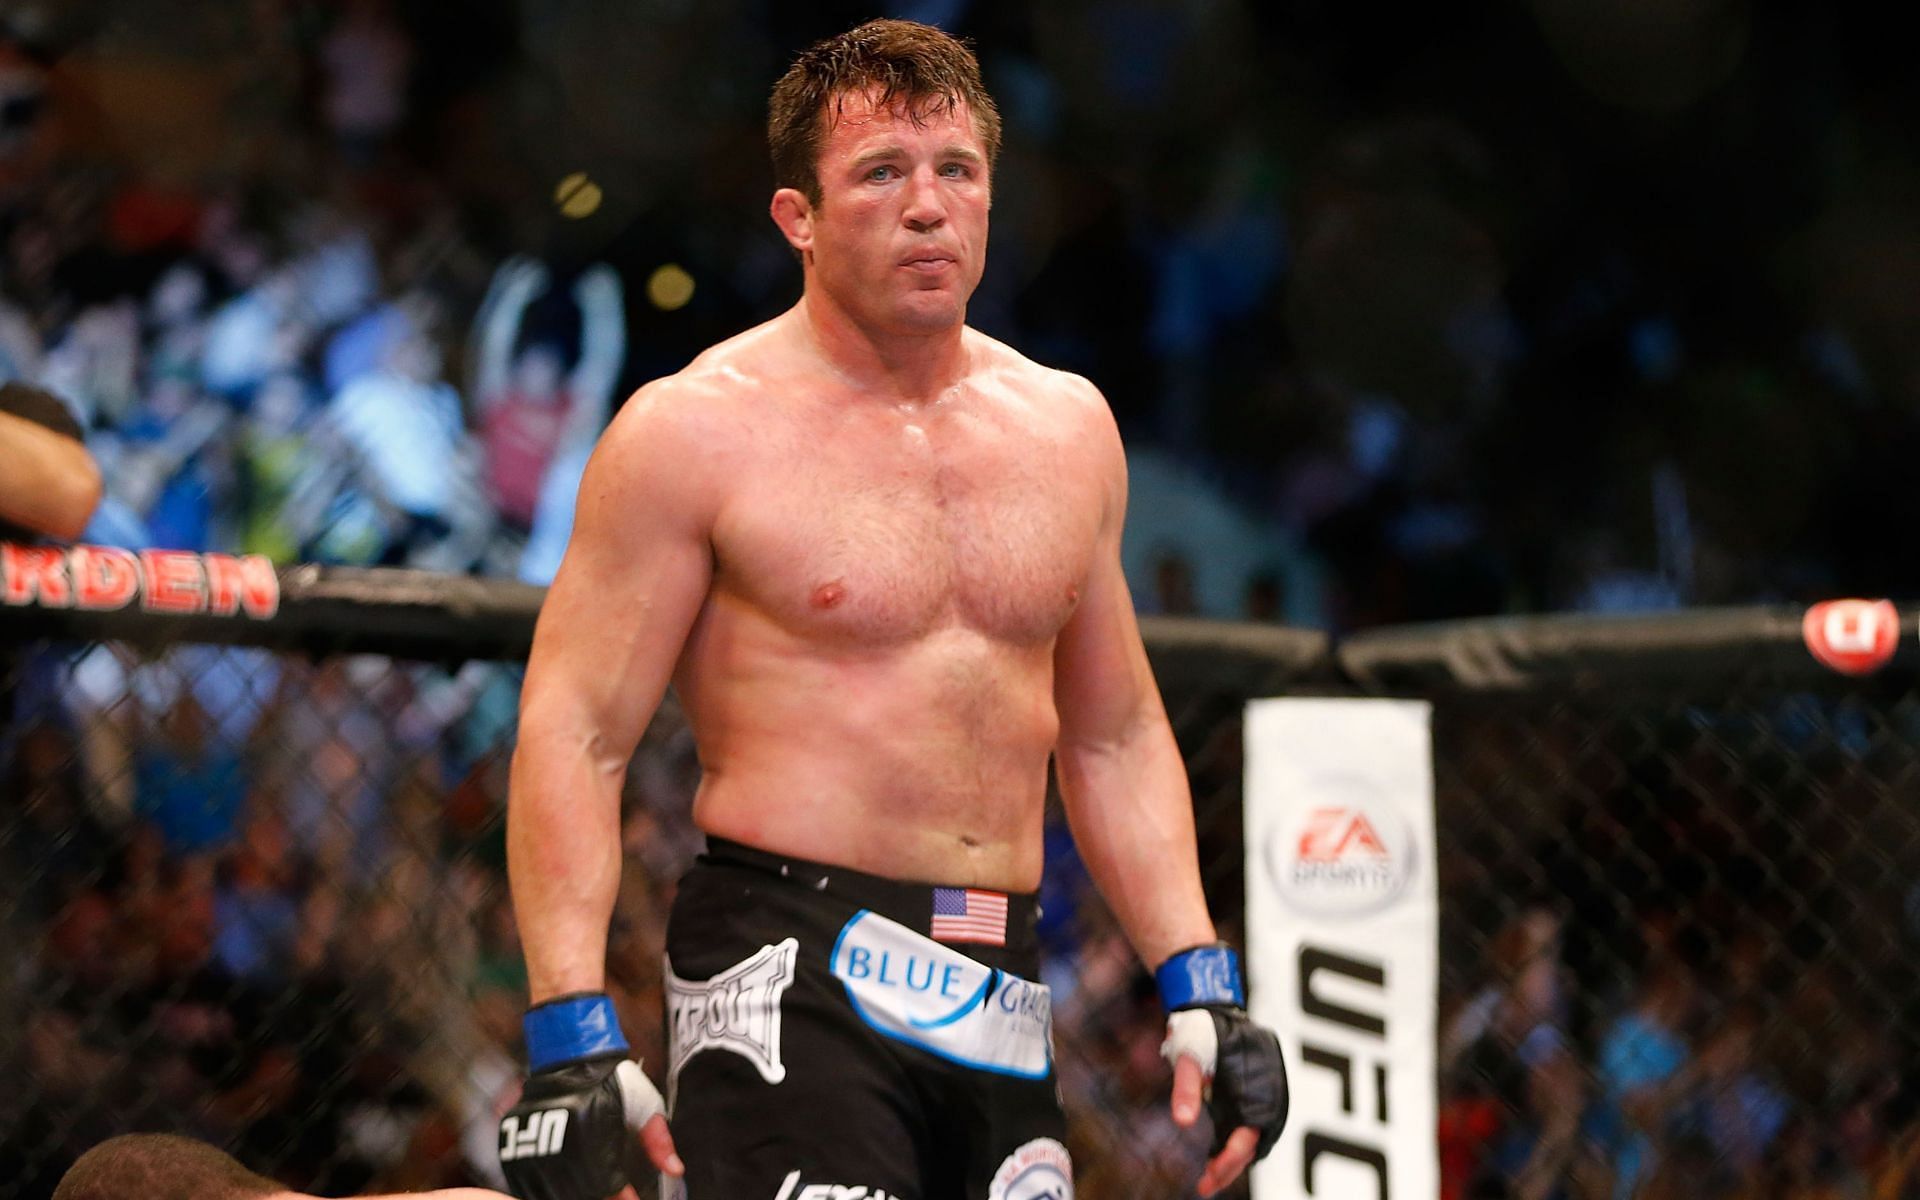 Chael Sonnen got away with a less-than-exciting fight style due to his stellar mic skills